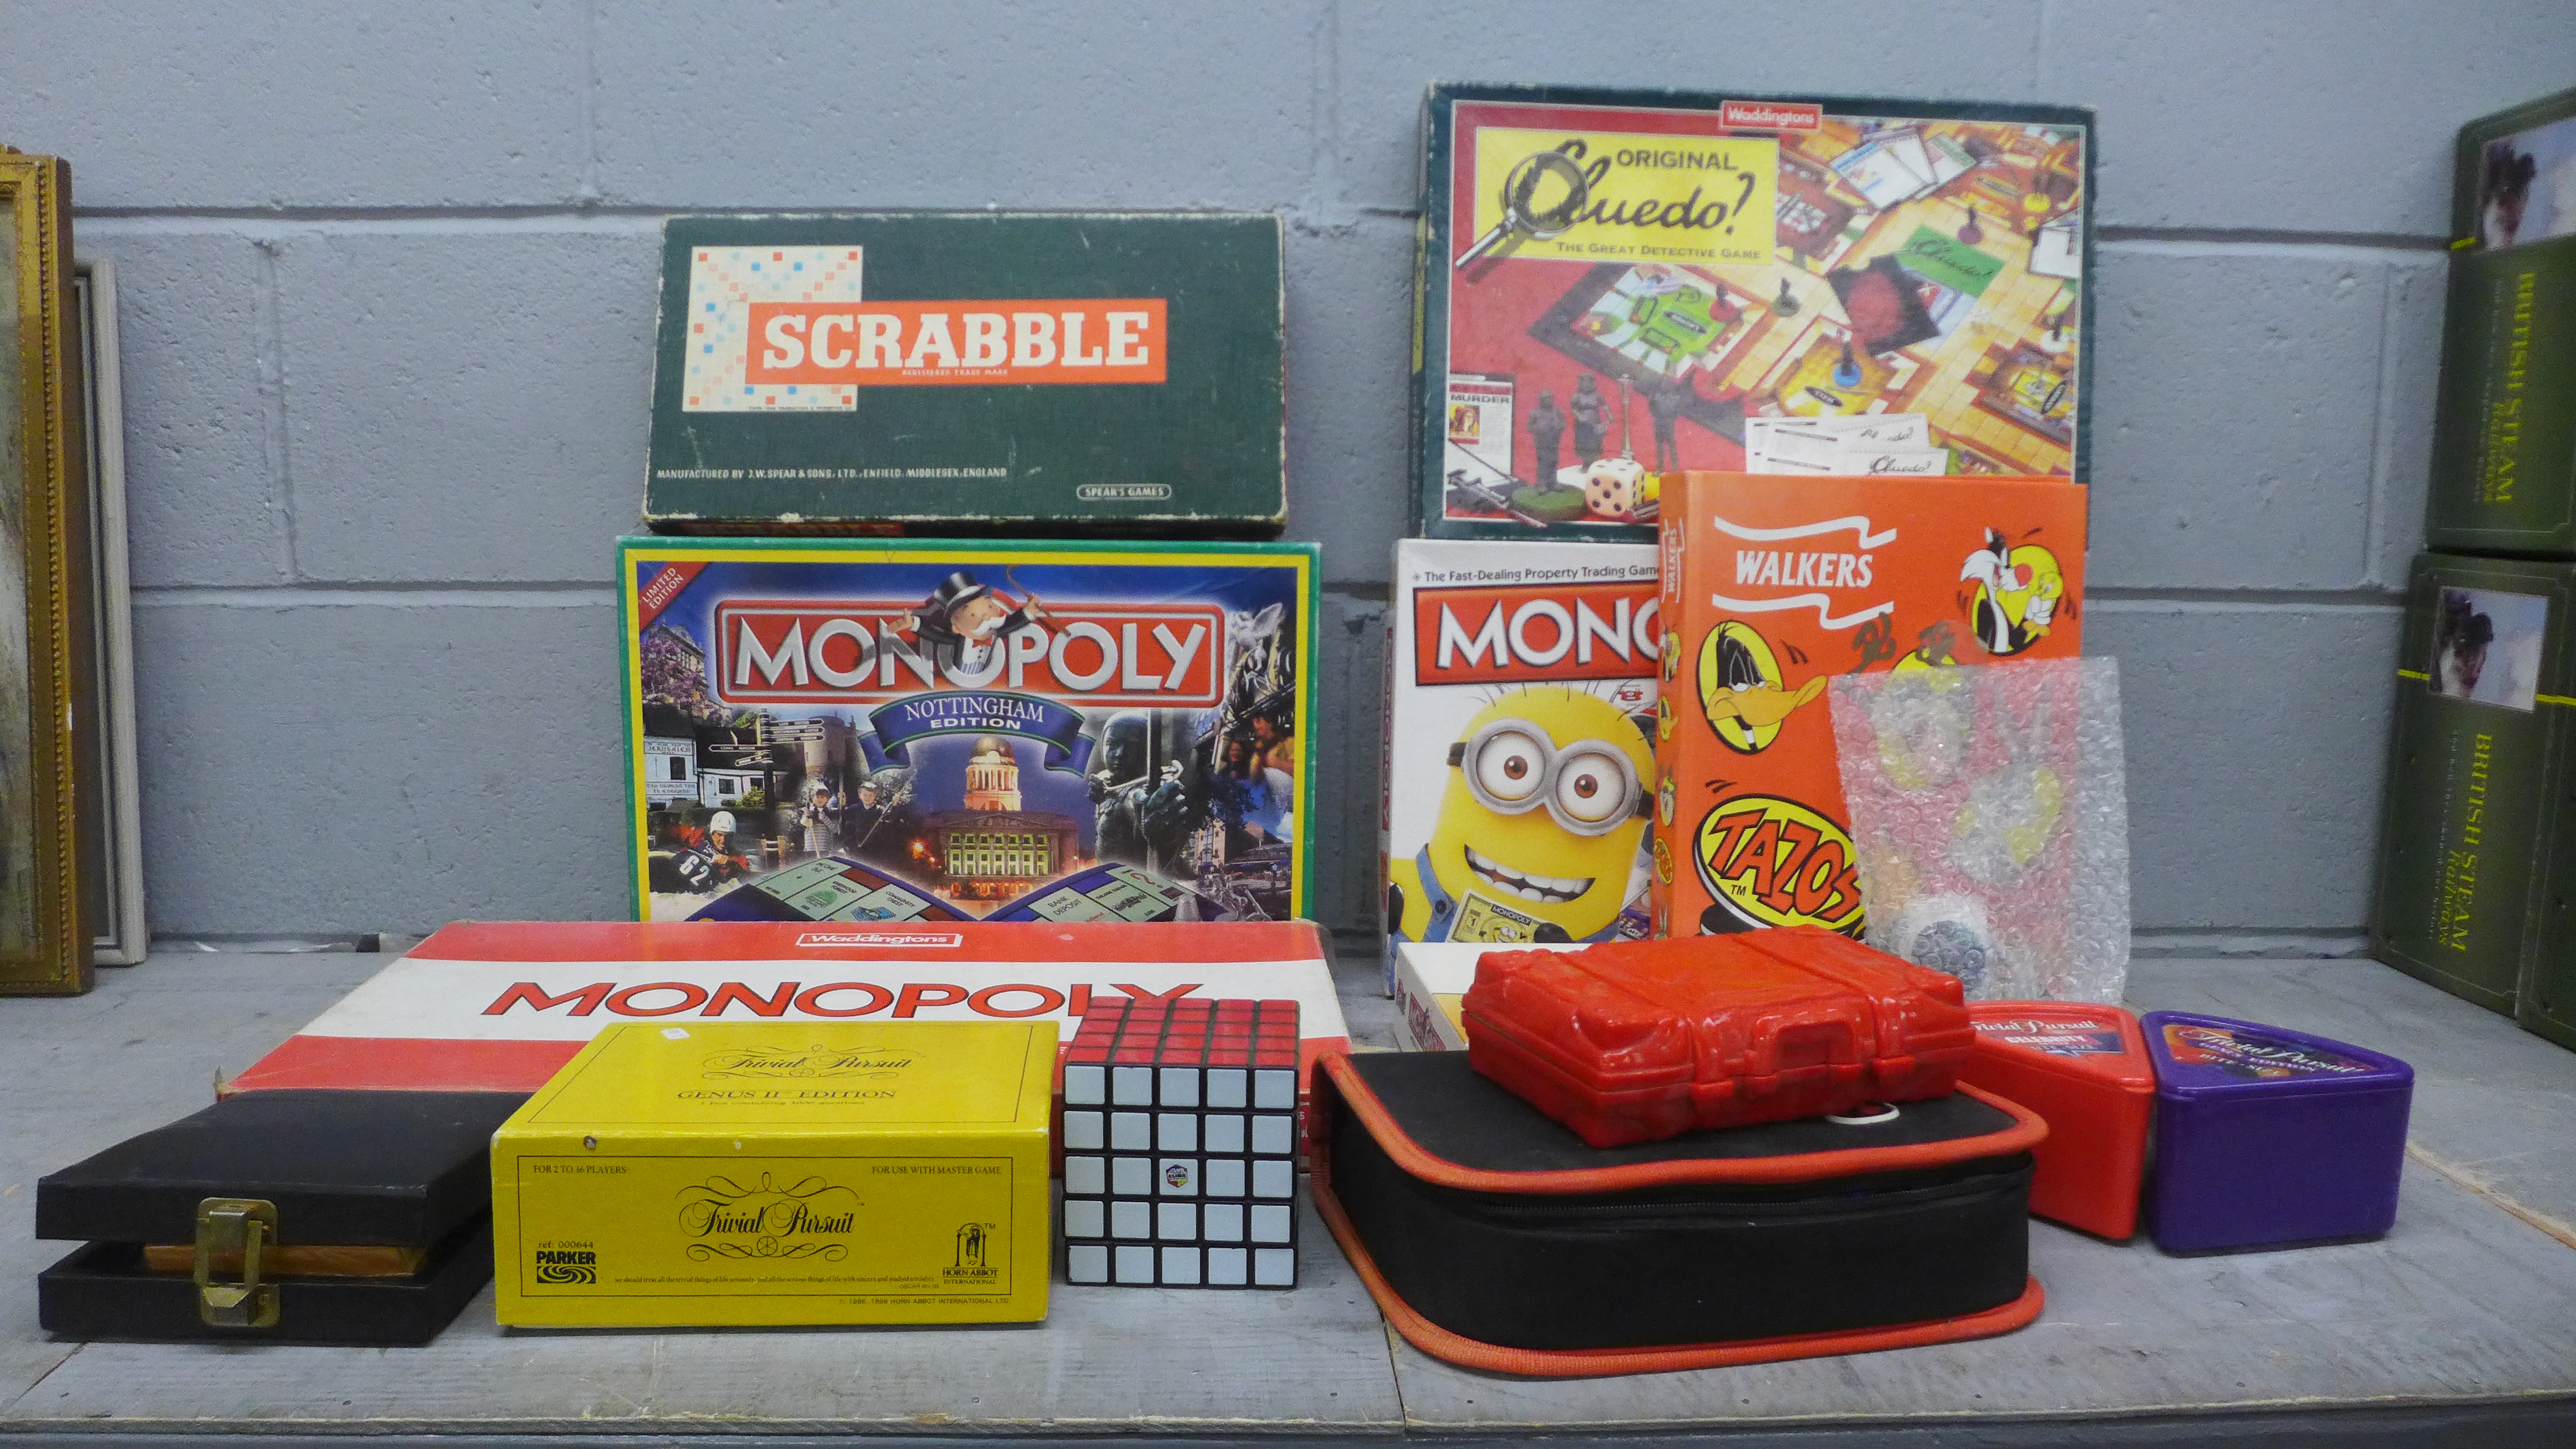 A collection of board games and other games, Monopoly, scrabble, etc **PLEASE NOTE THIS LOT IS NOT